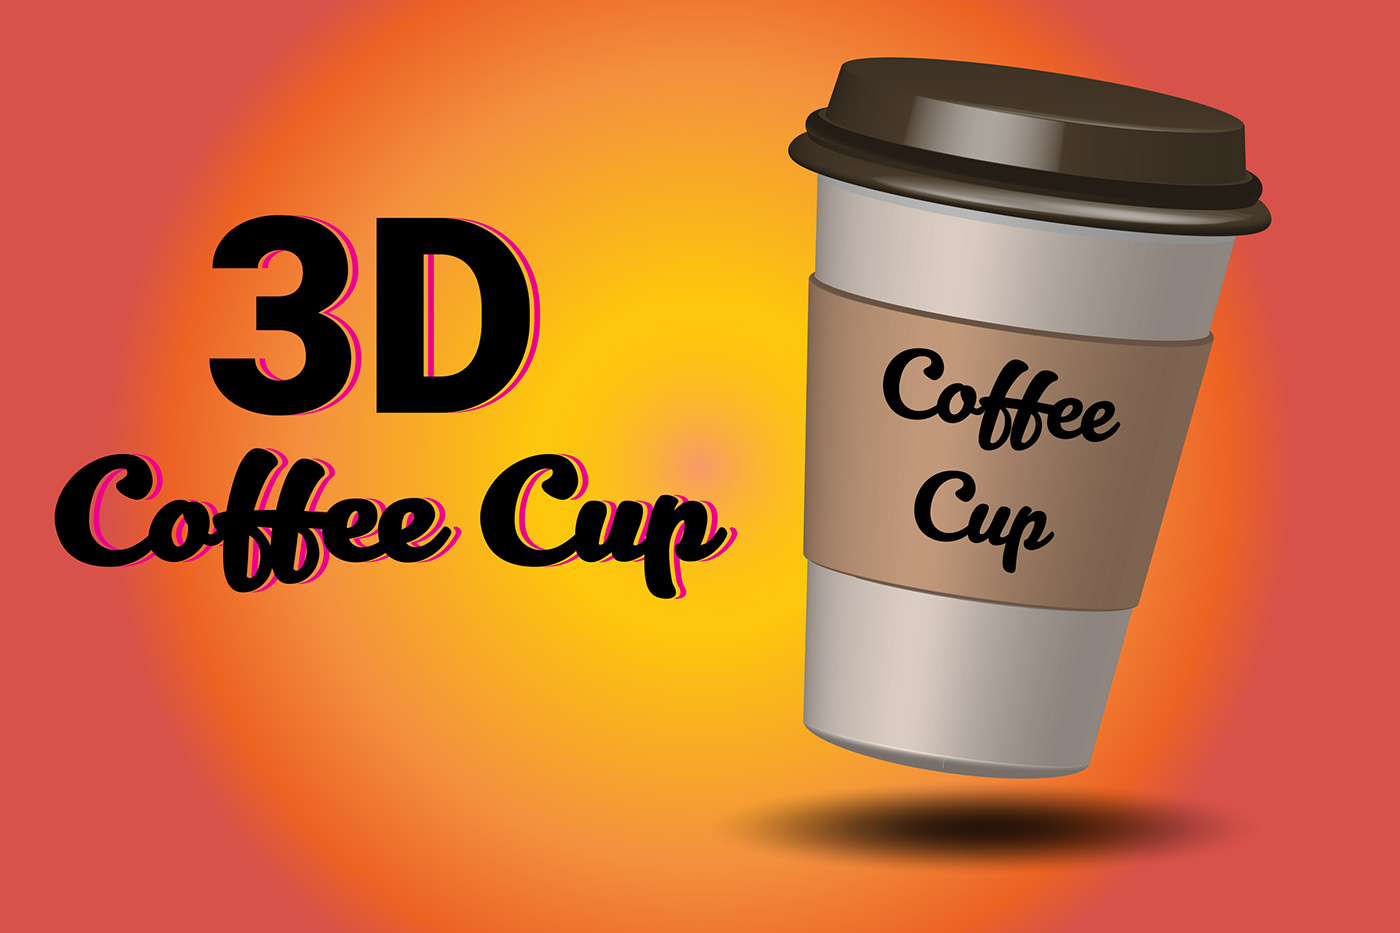 bottle beer 3D Coffee cup Paper Cup coffee beans cafe coffee shop